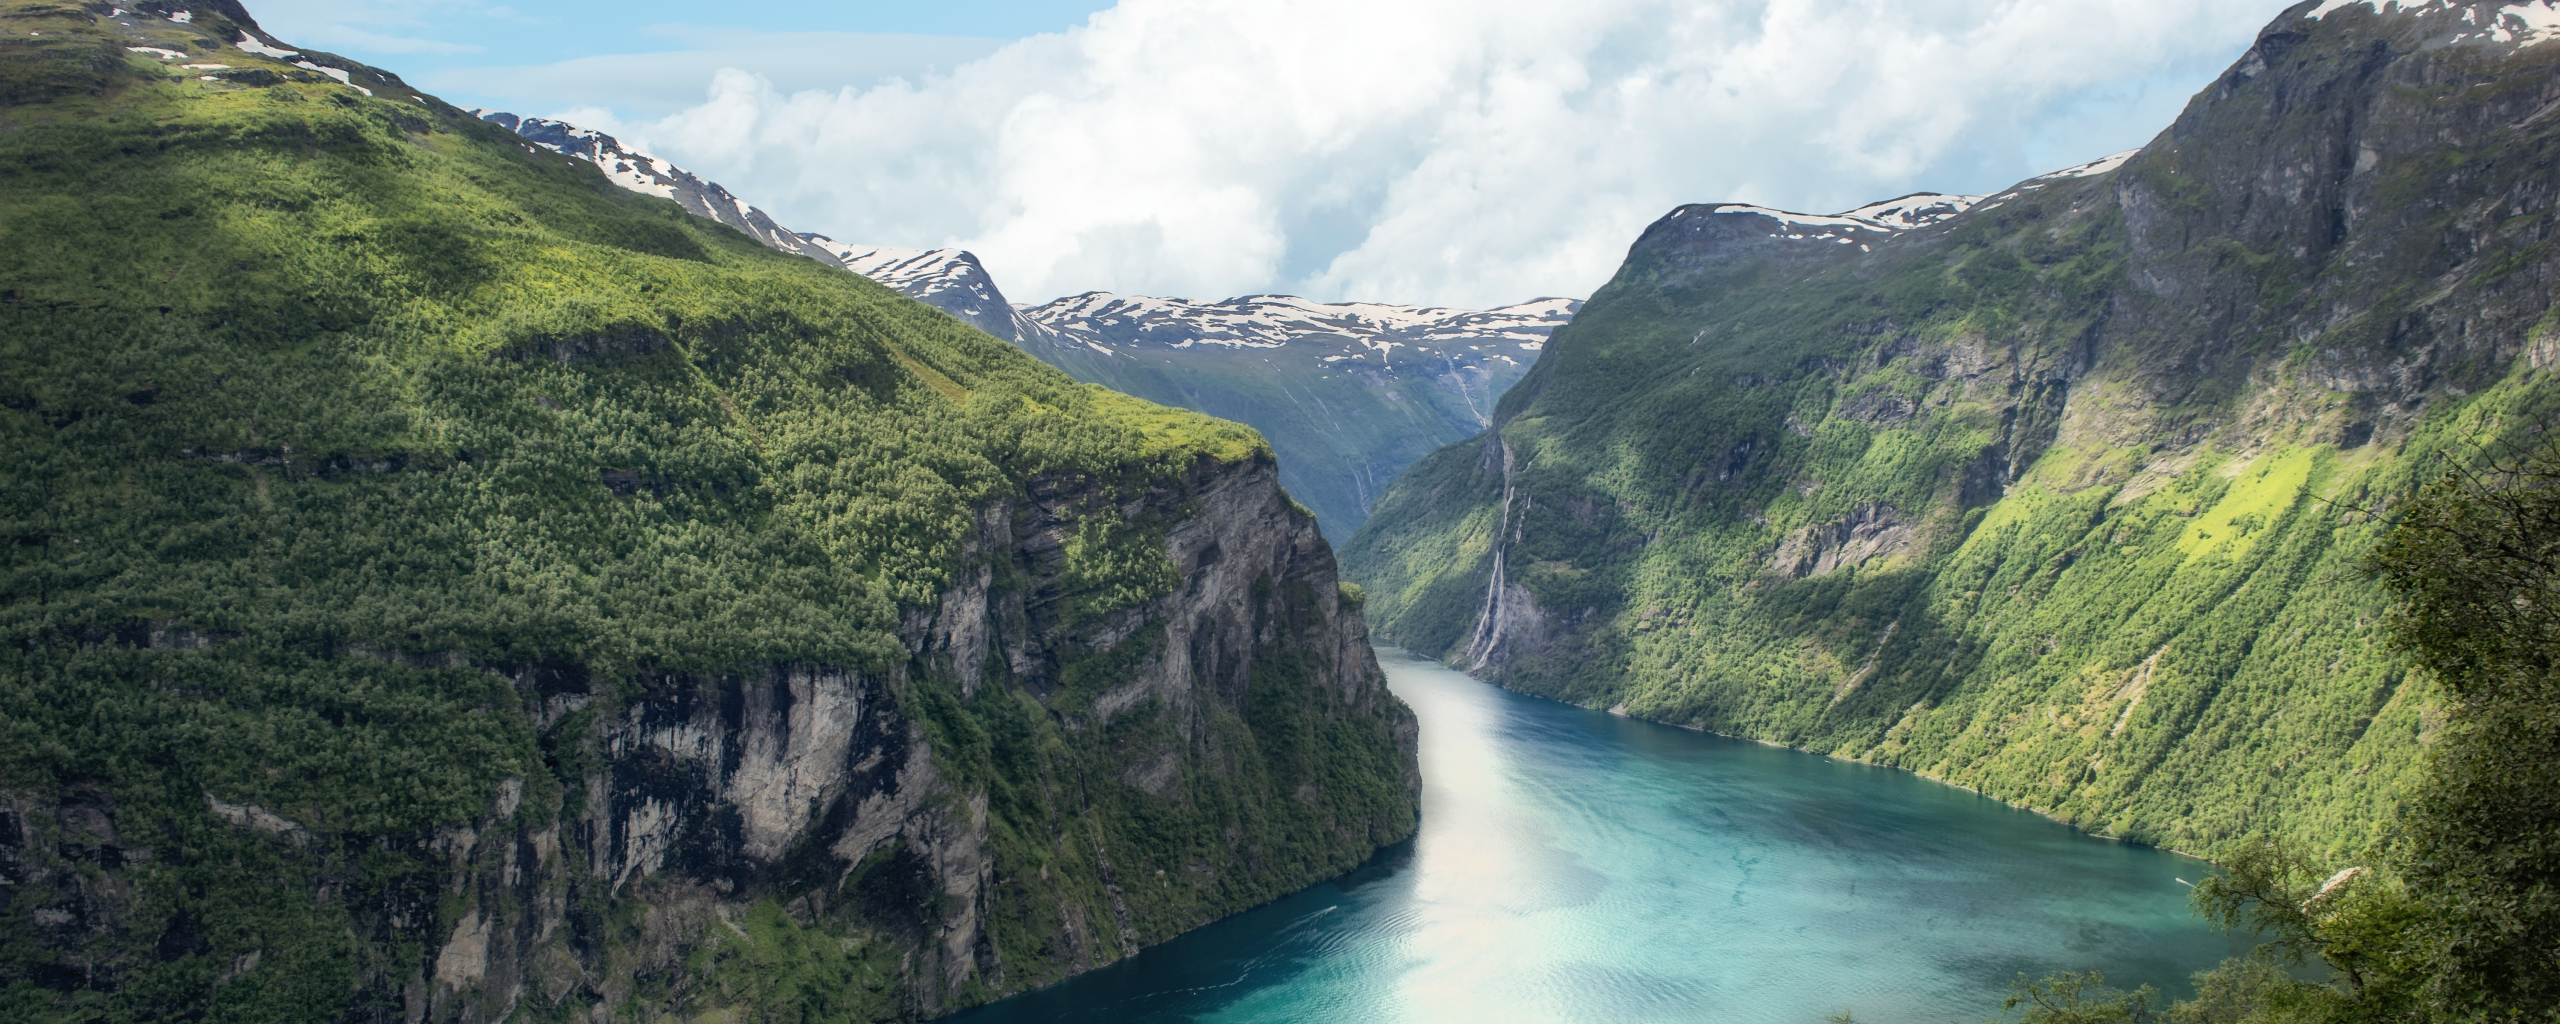 Download wallpaper 2560x1024 fjord, norway, mountains, river, nature, dual  wide 21:9 2560x1024 hd background, 15520